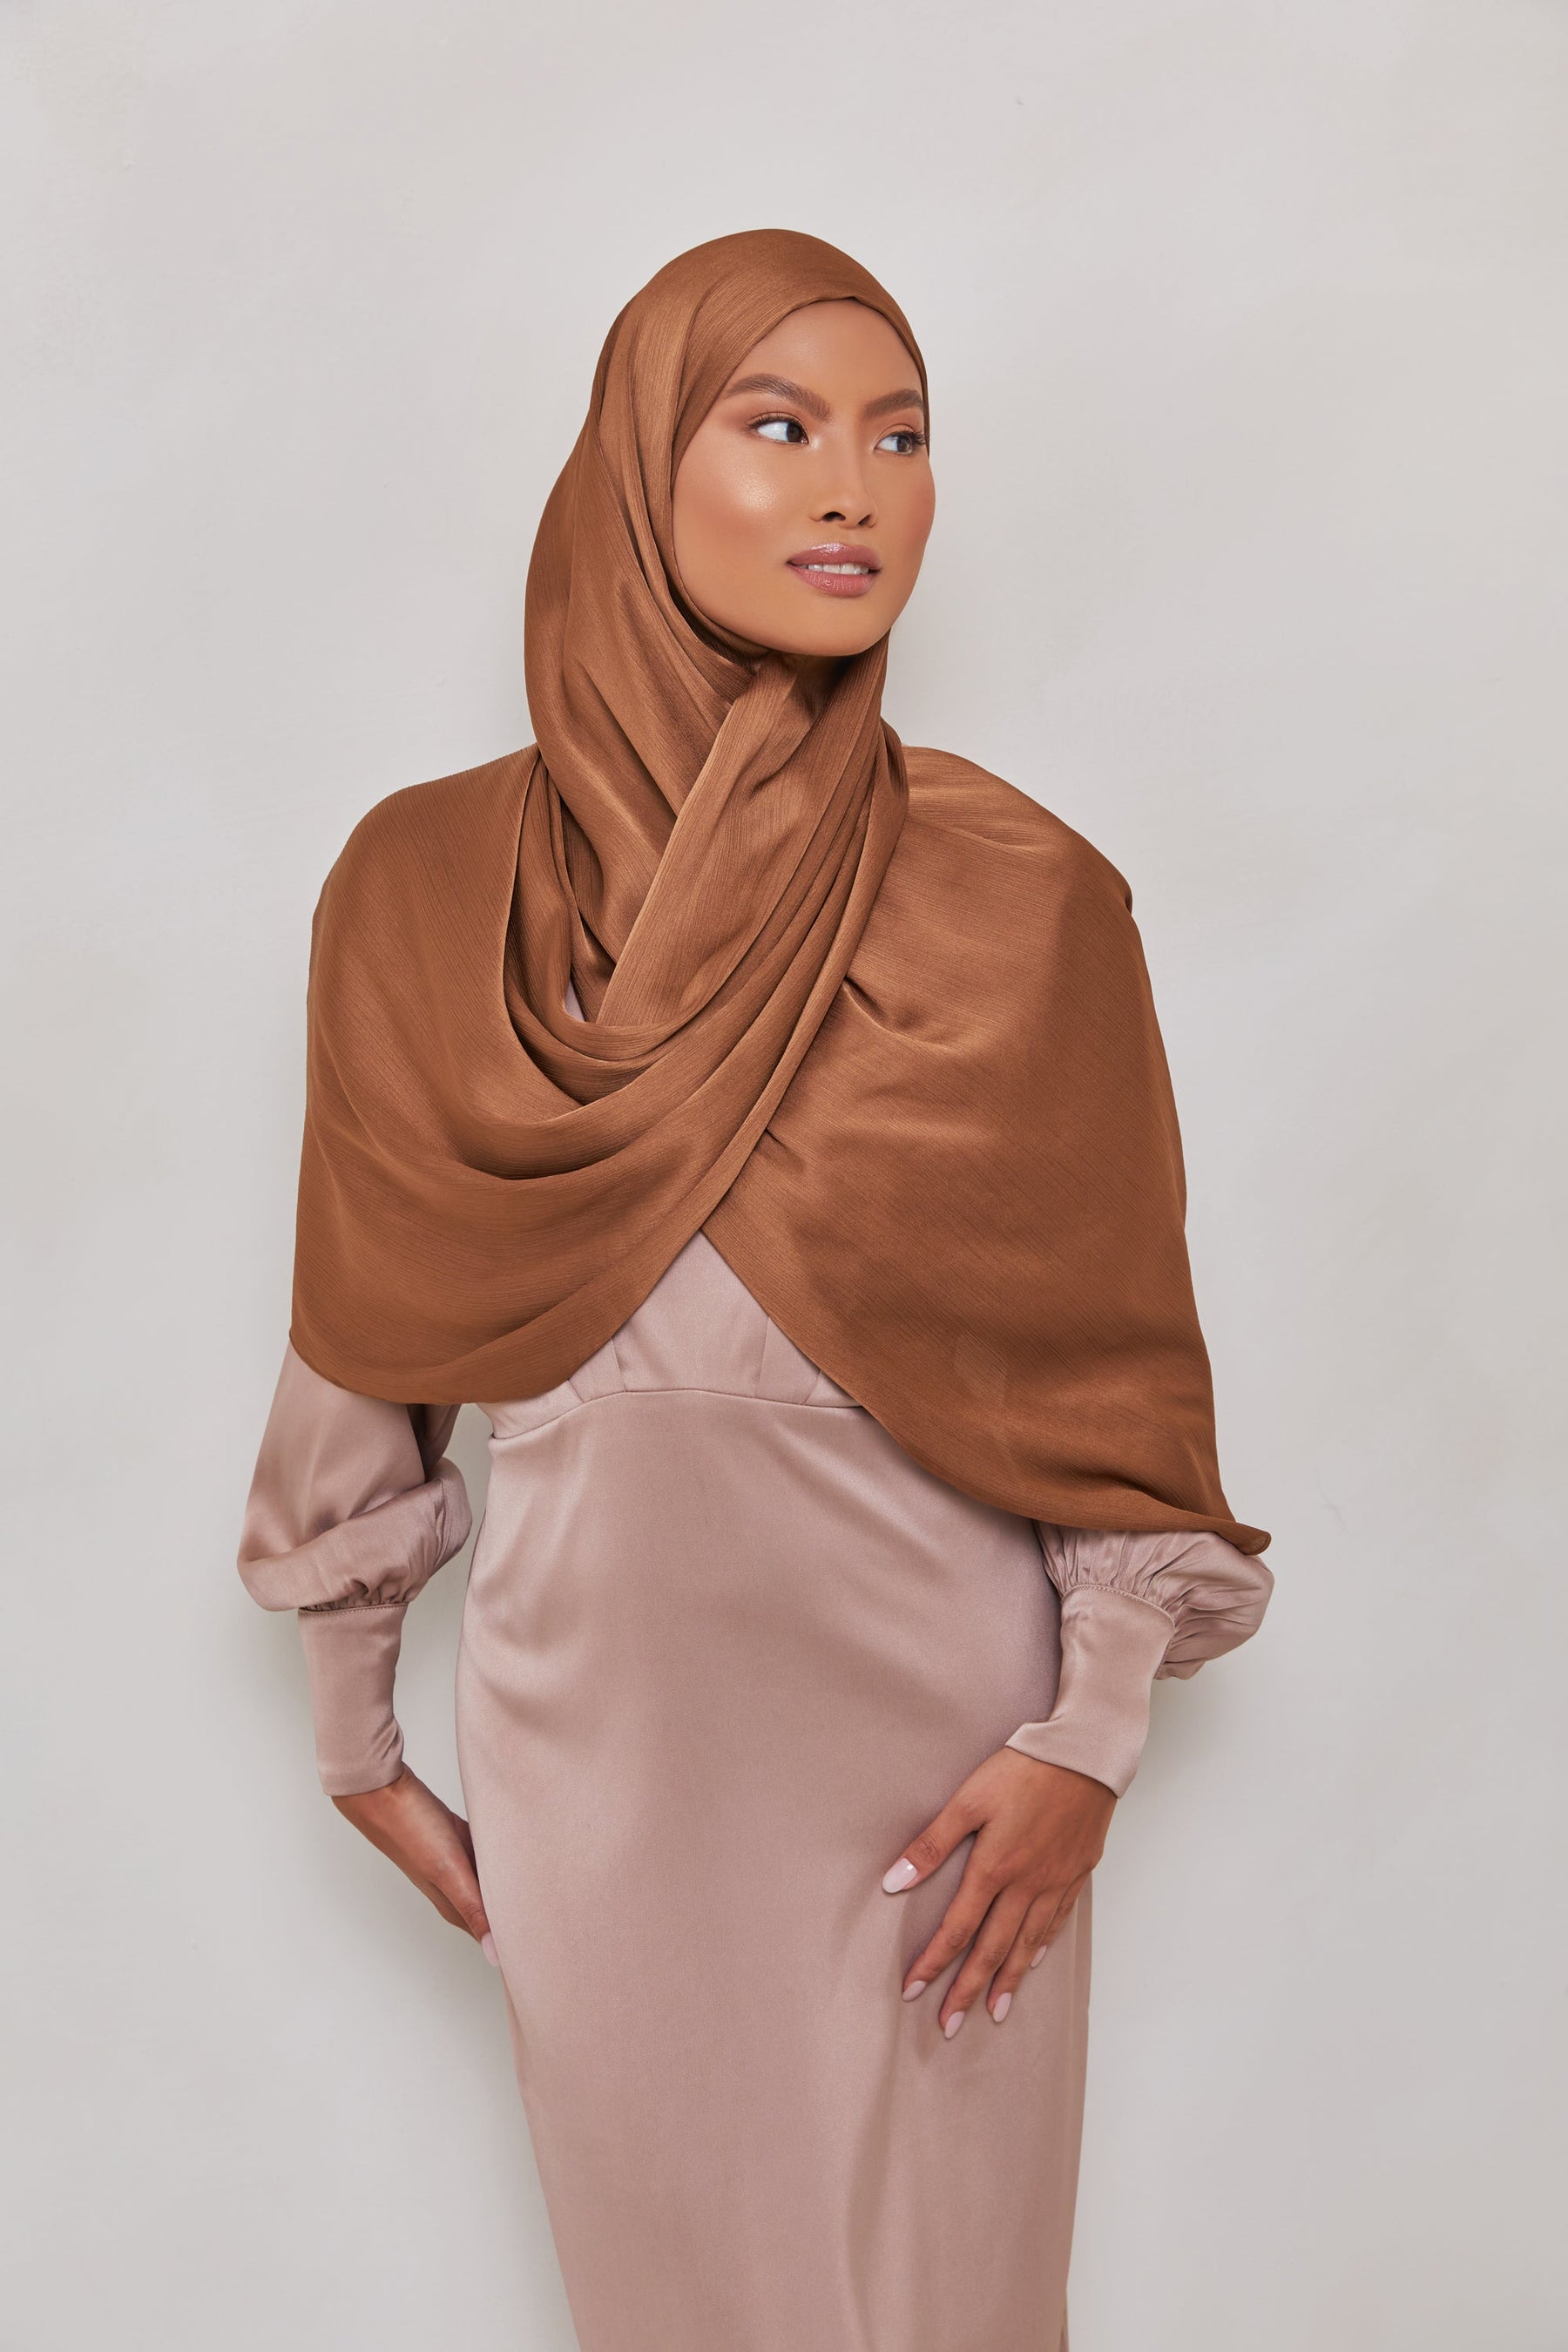 TEXTURE Satin Crepe Hijab - Toffee Crepe Veiled Collection 